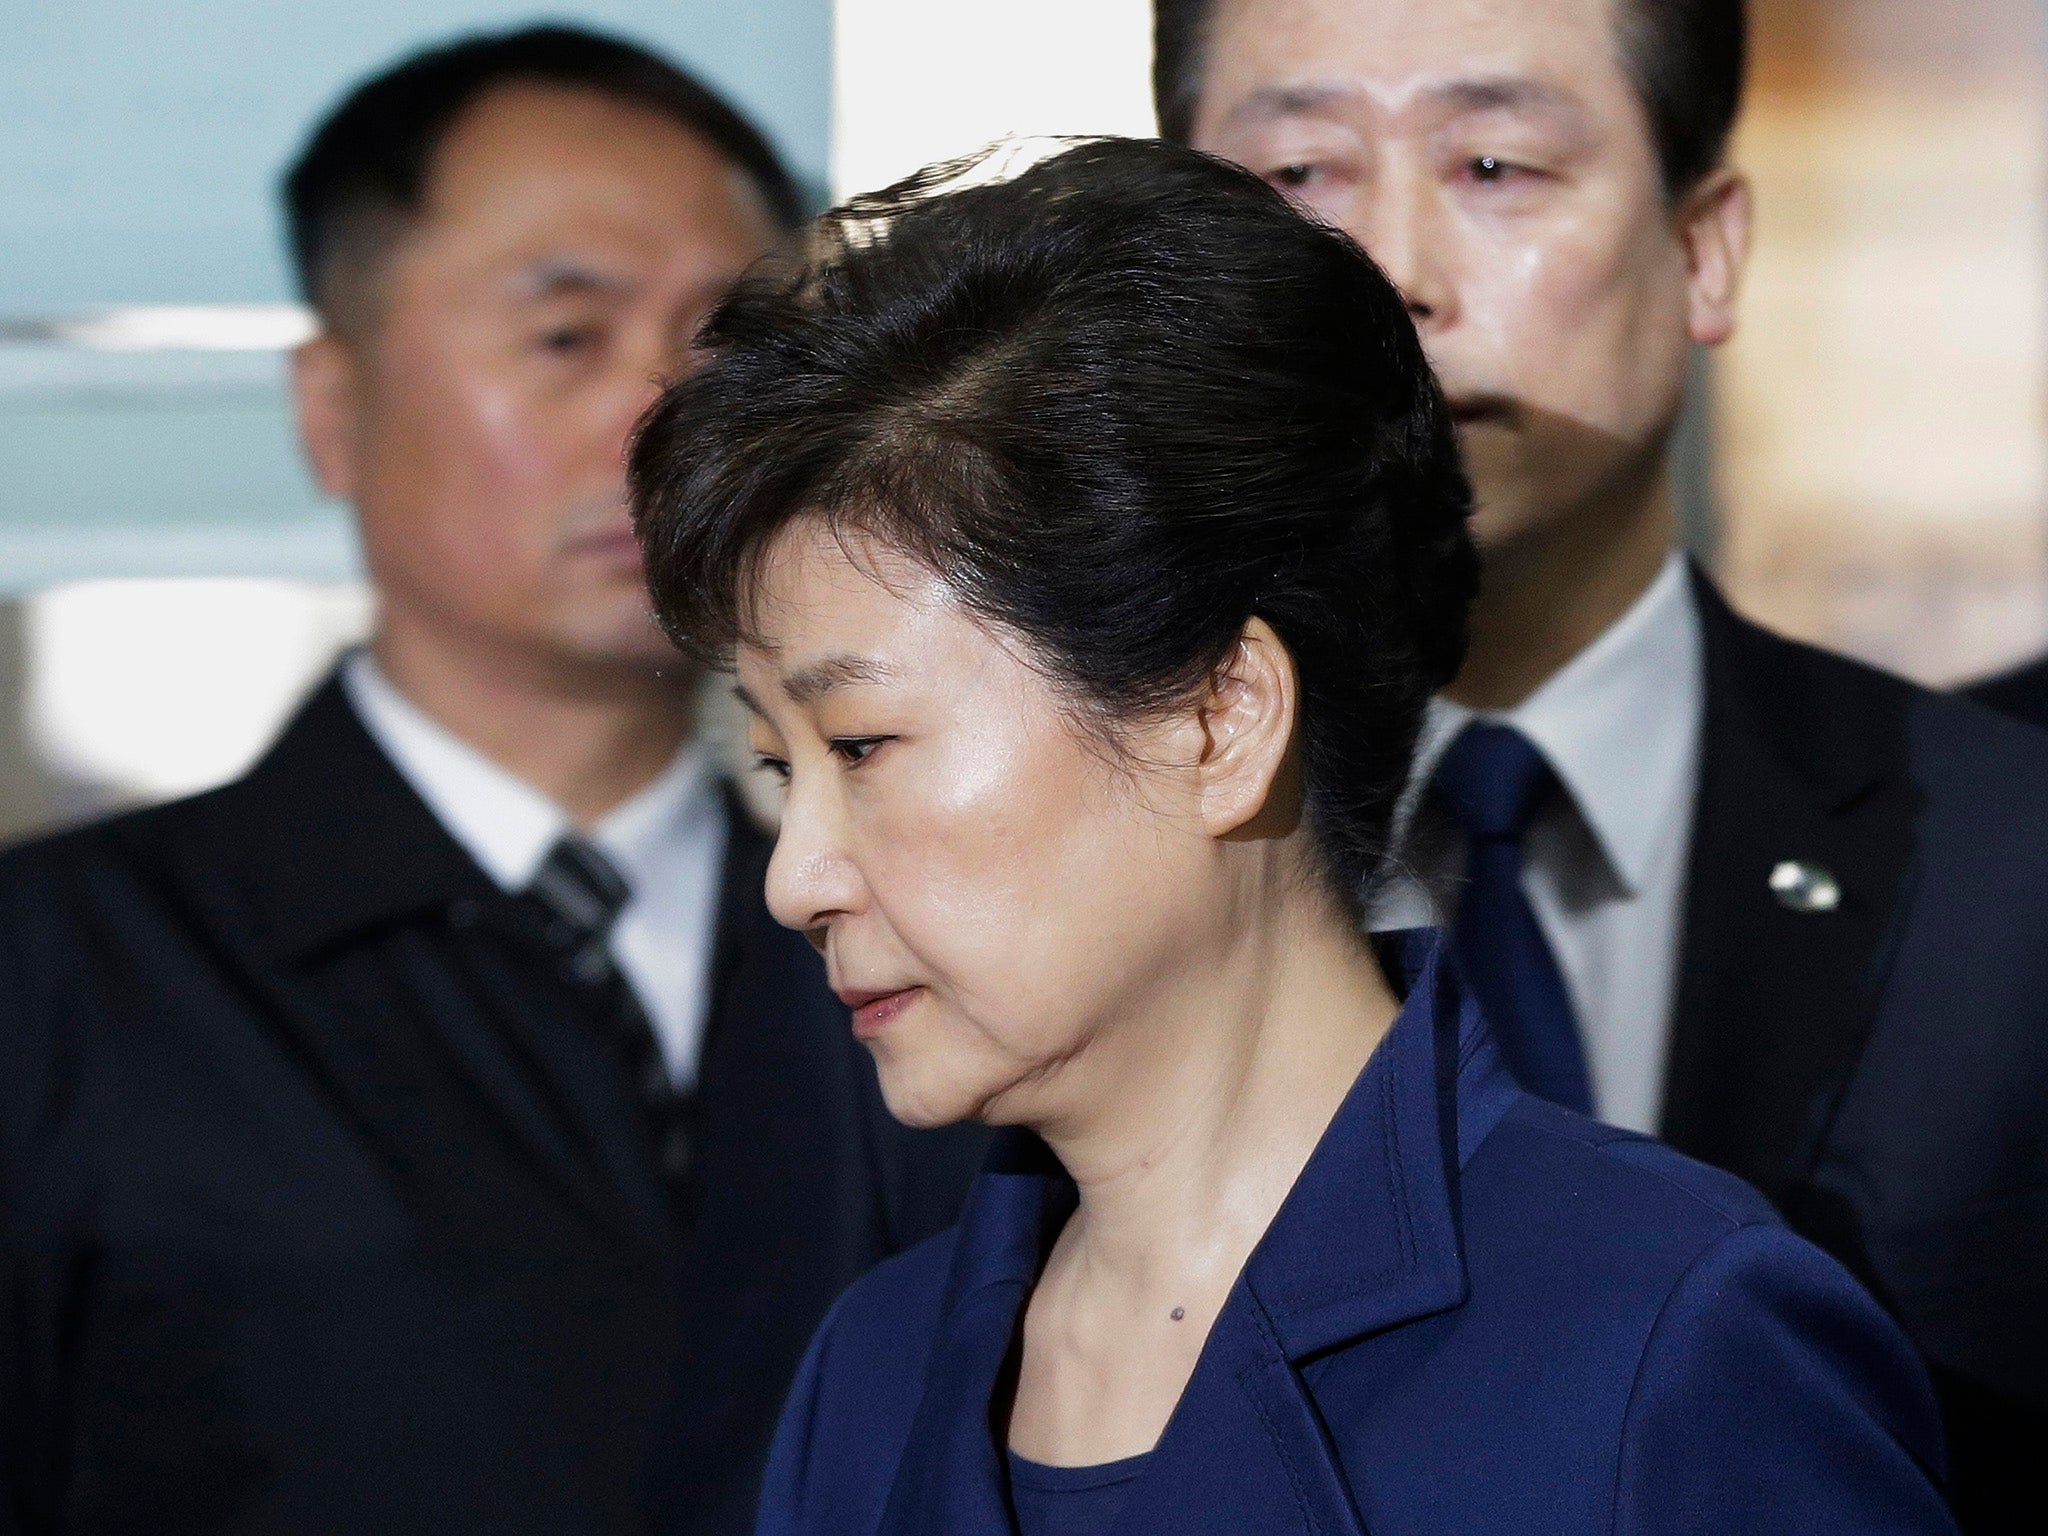 Ms Park was impeached from office in March over a corruption scandal that plunged the country into political turmoil